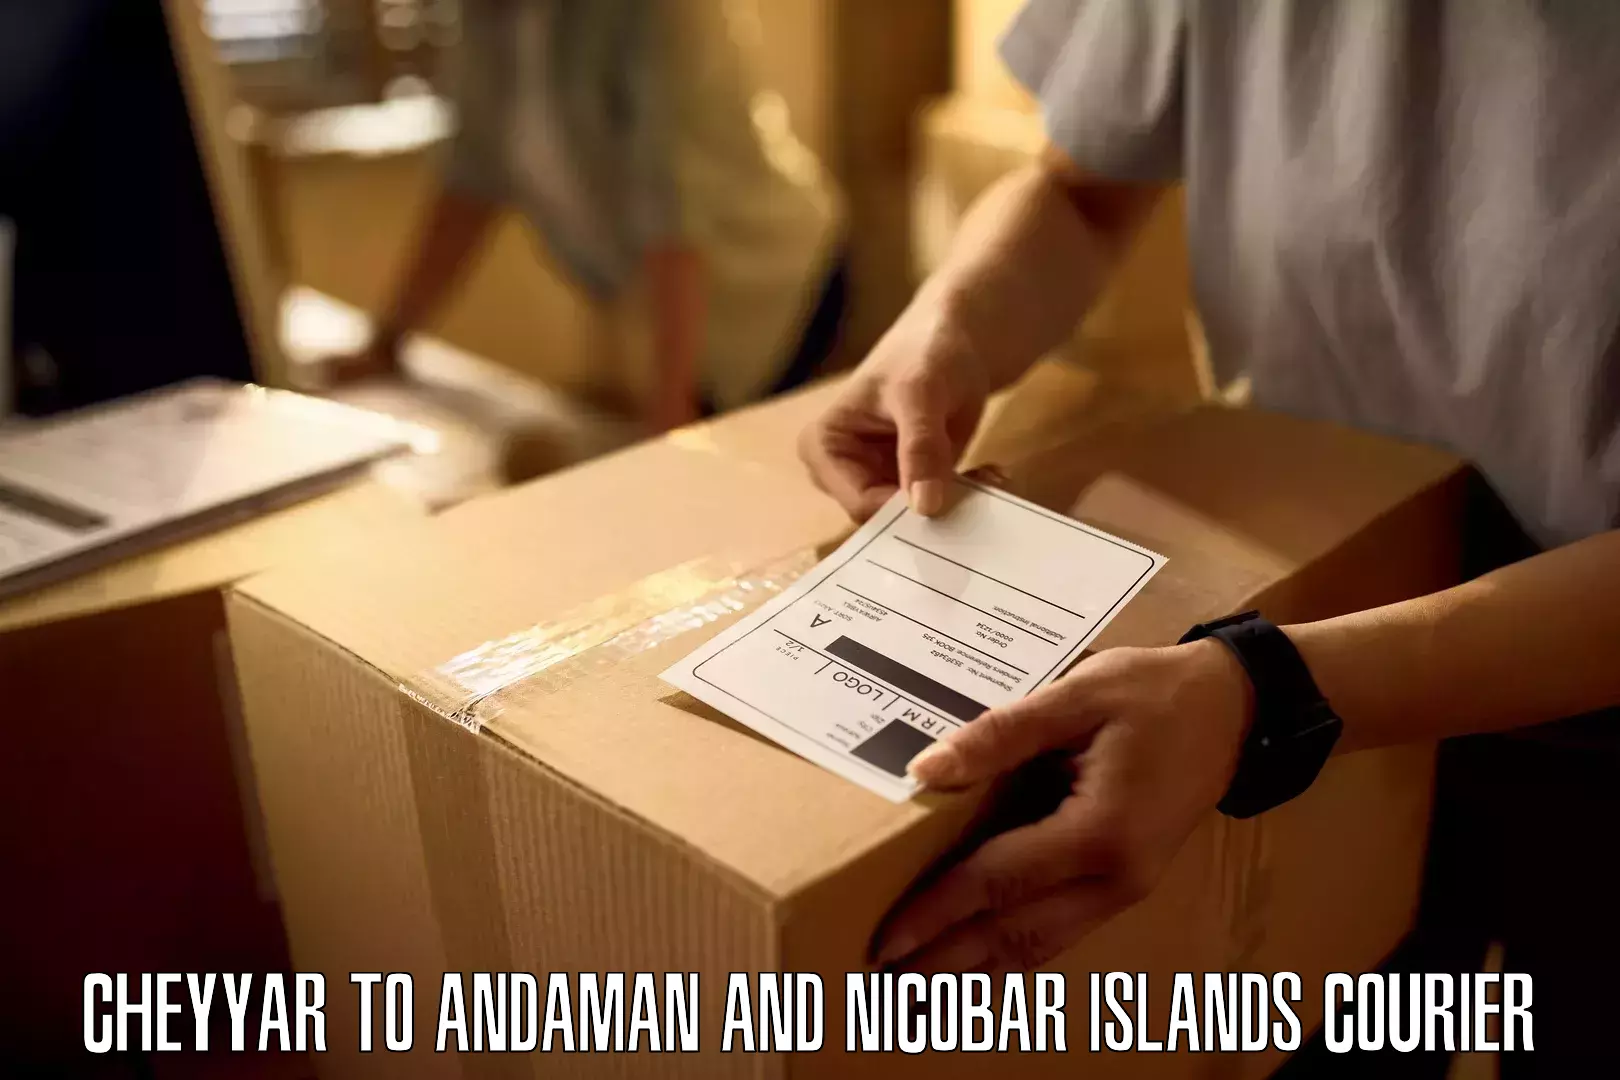 Courier service efficiency Cheyyar to Andaman and Nicobar Islands